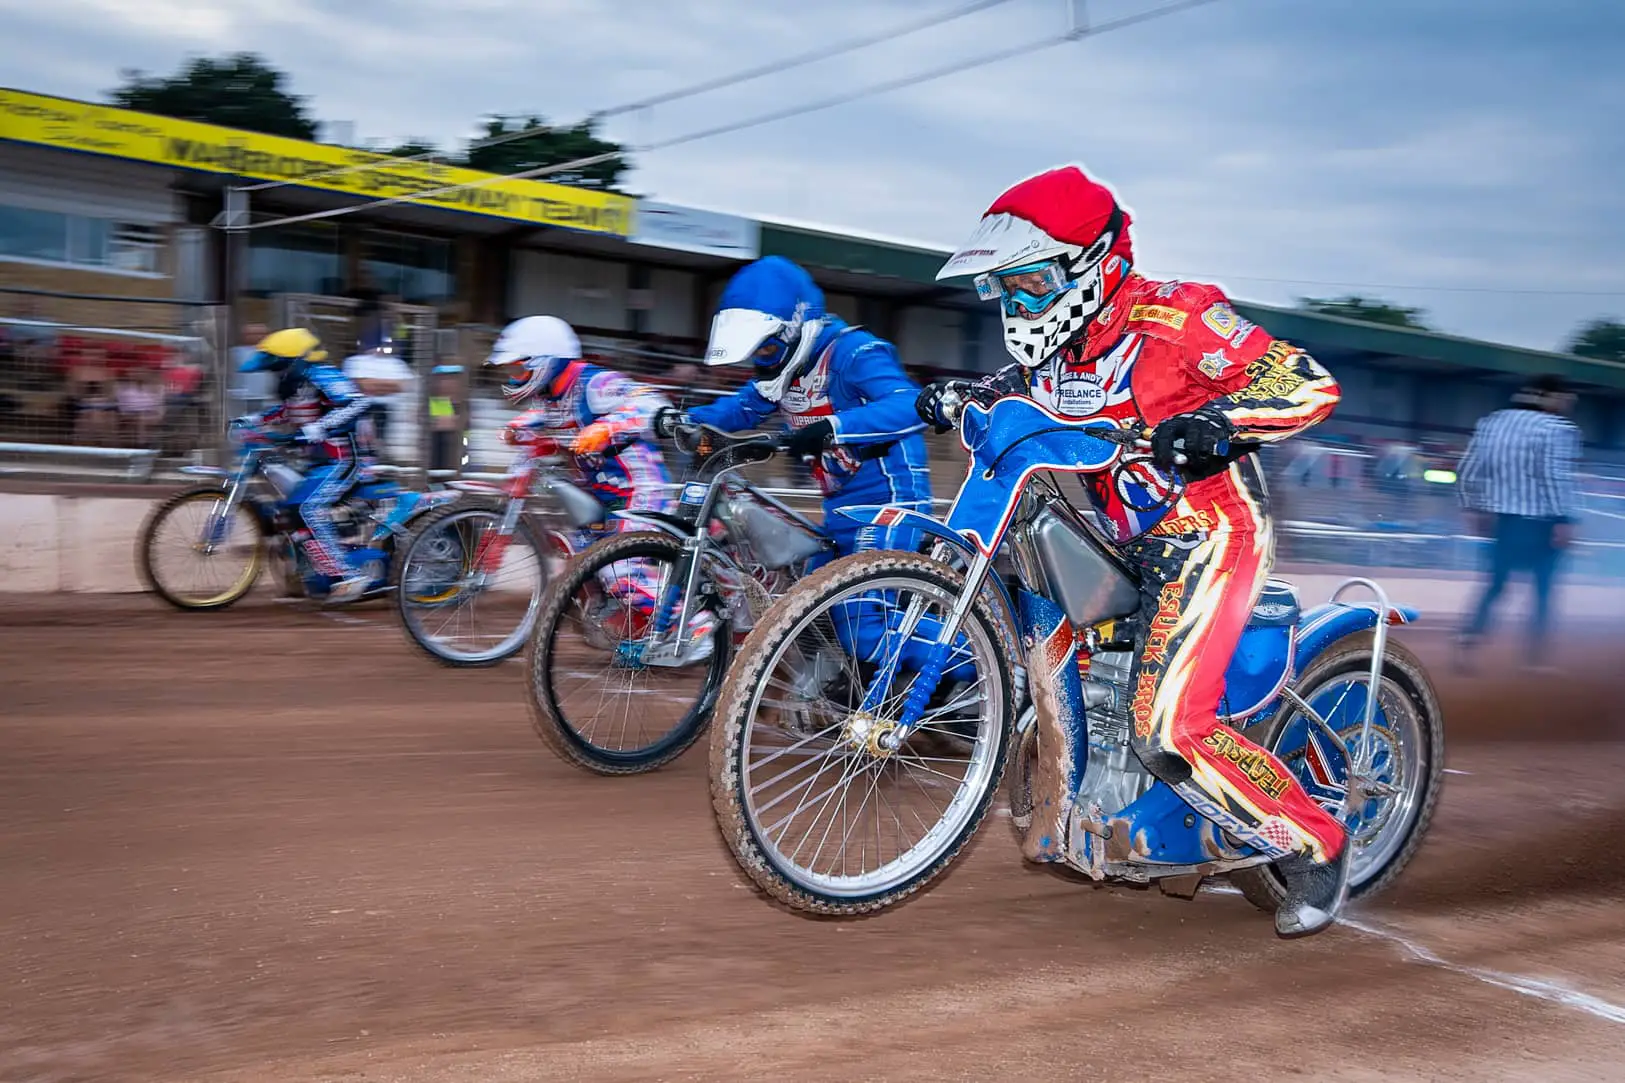 Riders on the speedway start line